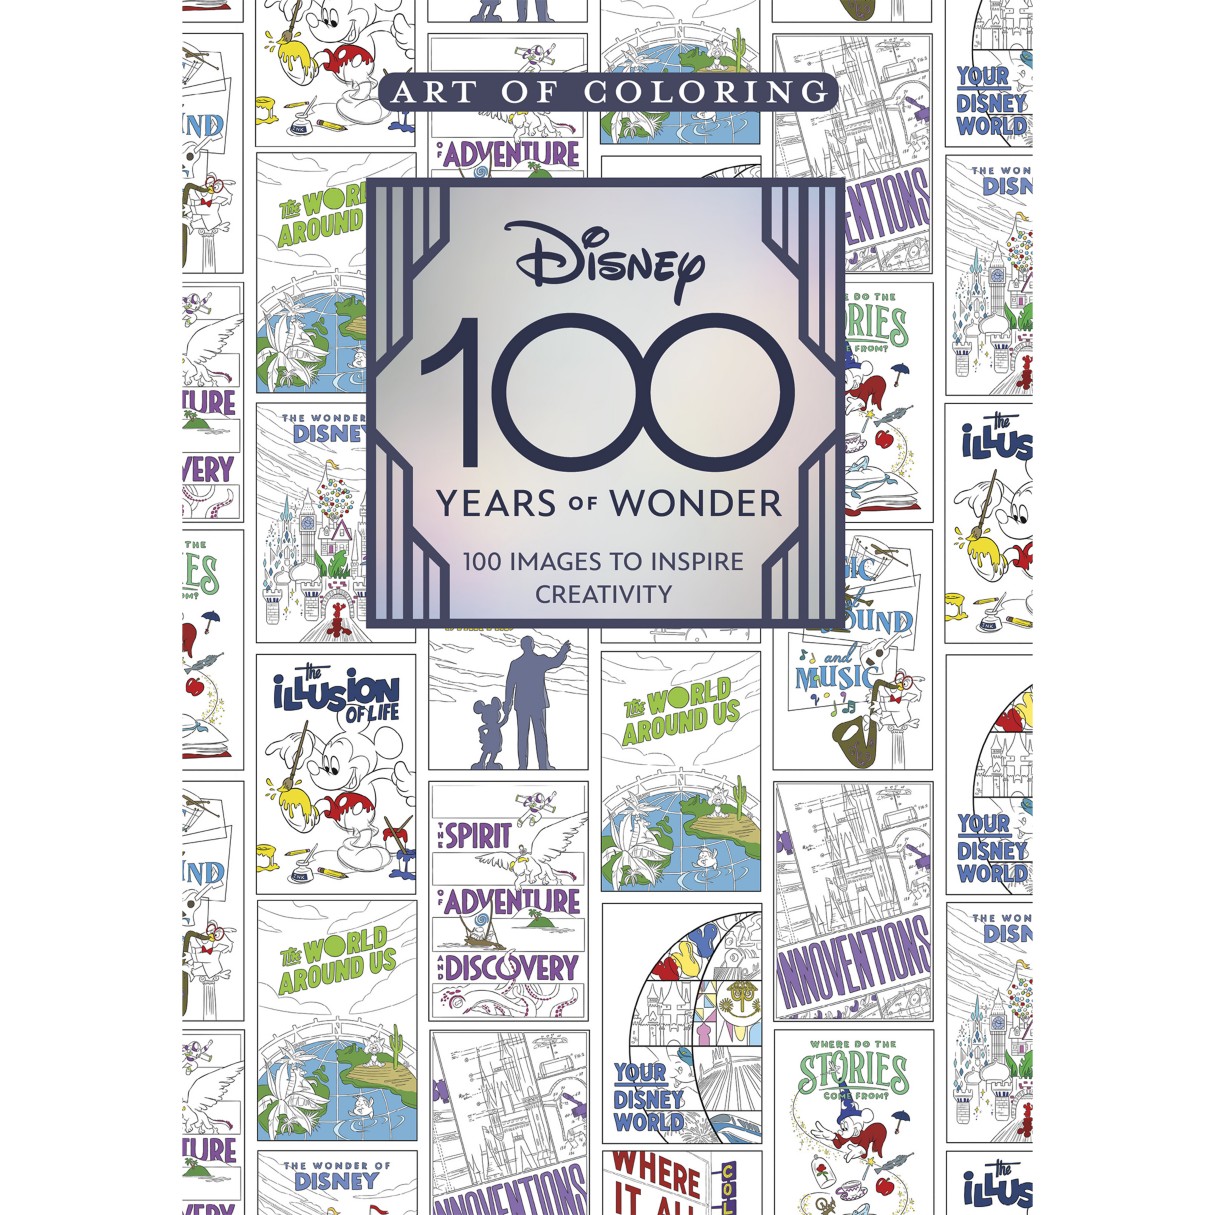 Art of Coloring: Disney 100 Years of Wonder – 100 Images to Inspire Creativity Book